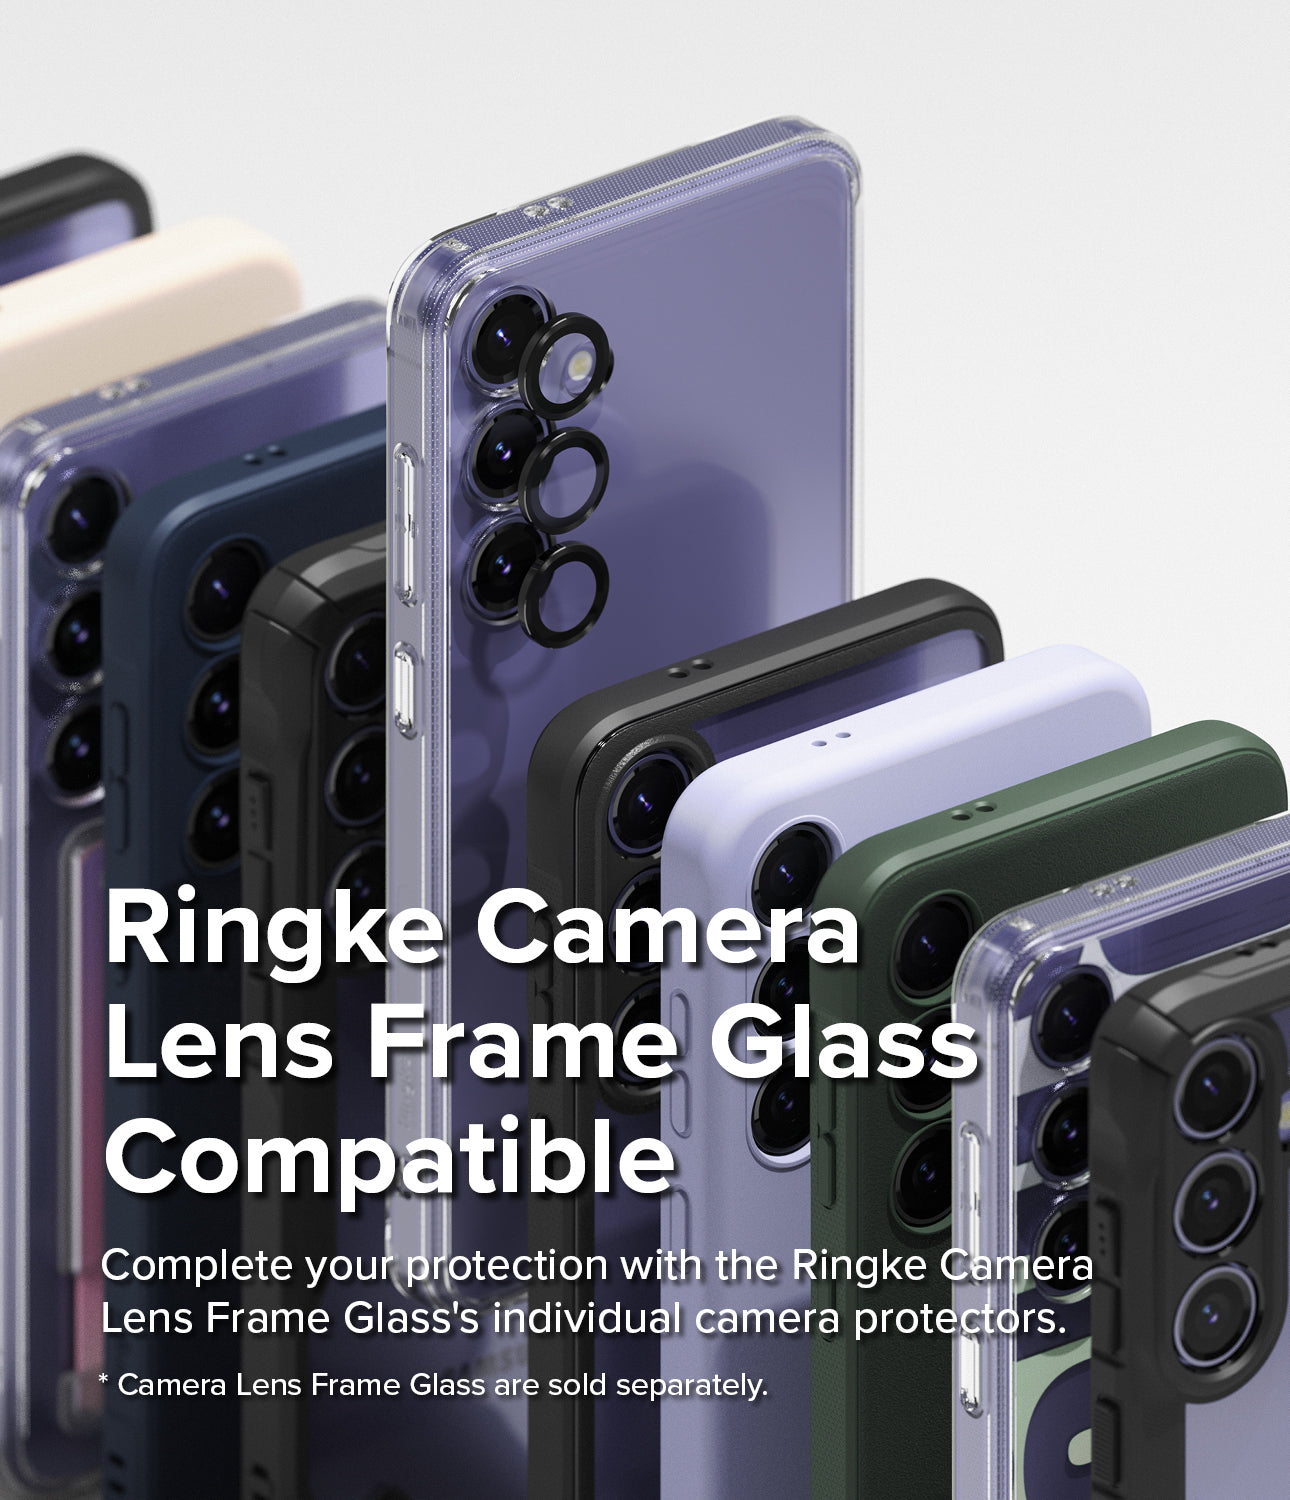 Galaxy S24 Plus Case | Onyx Design - Ringke Camera Lens Frame Glass Compatible. Complete your protection with the Ringke Camera Lens Frame Glass' individual camera protectors.